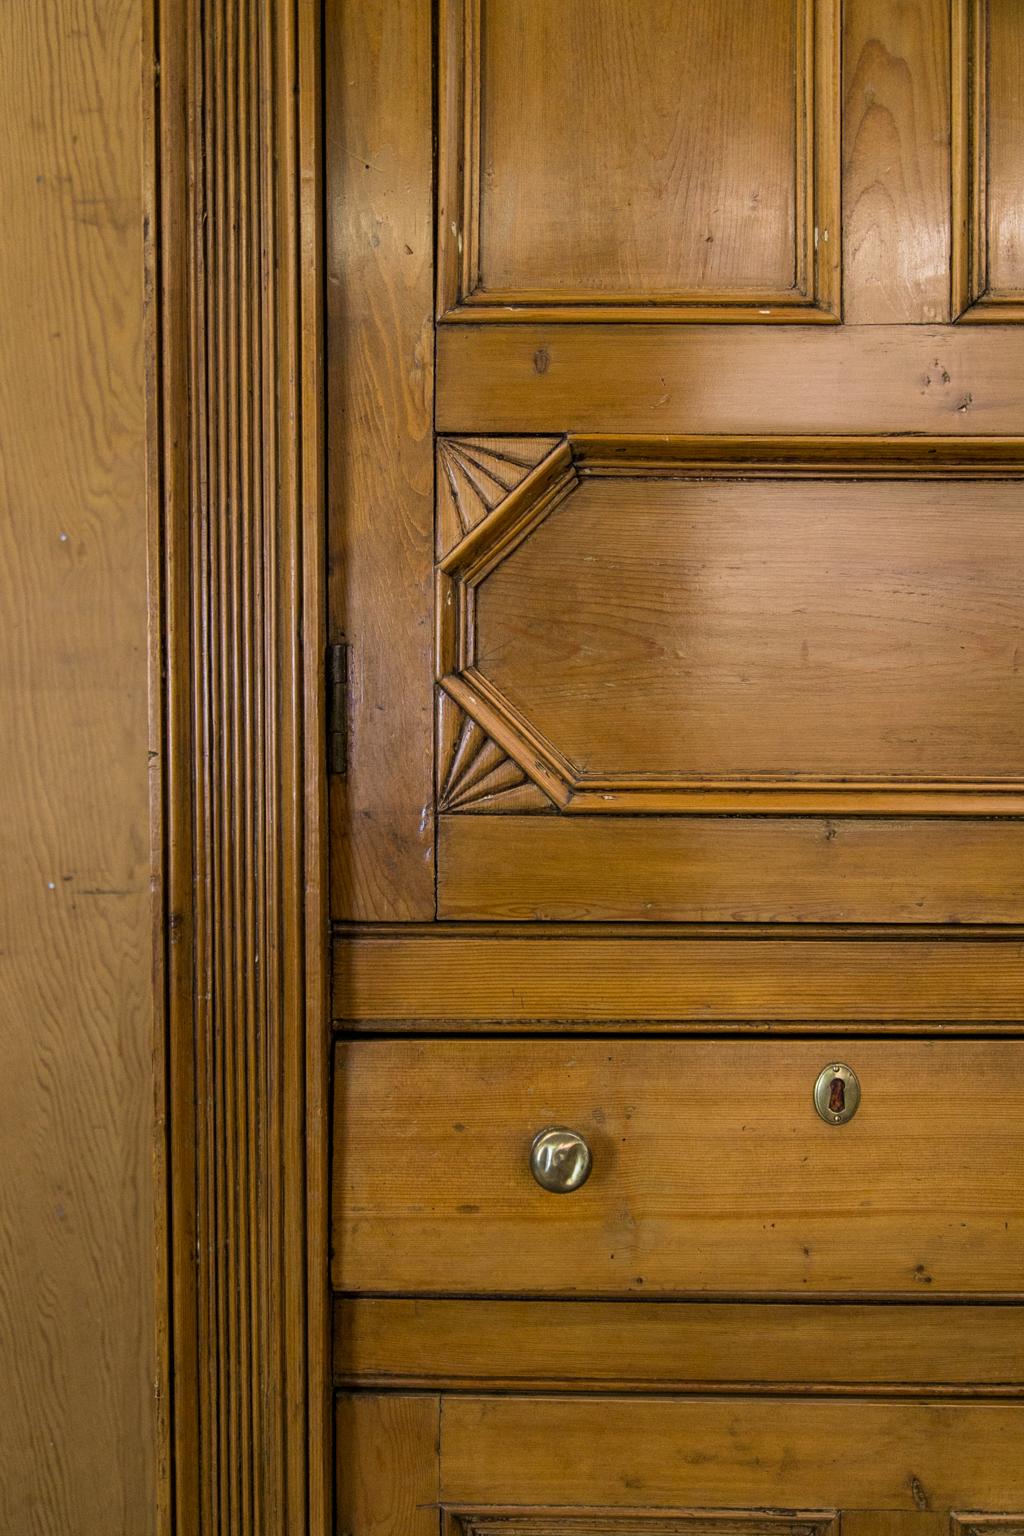 This English pine cupboard has two upper doors having two recessed panels framed with carved moldings and lower panels framed with carved stylized quarter fans. The cornice has a carved reeded frieze, and the stiles have recessed reeded panels